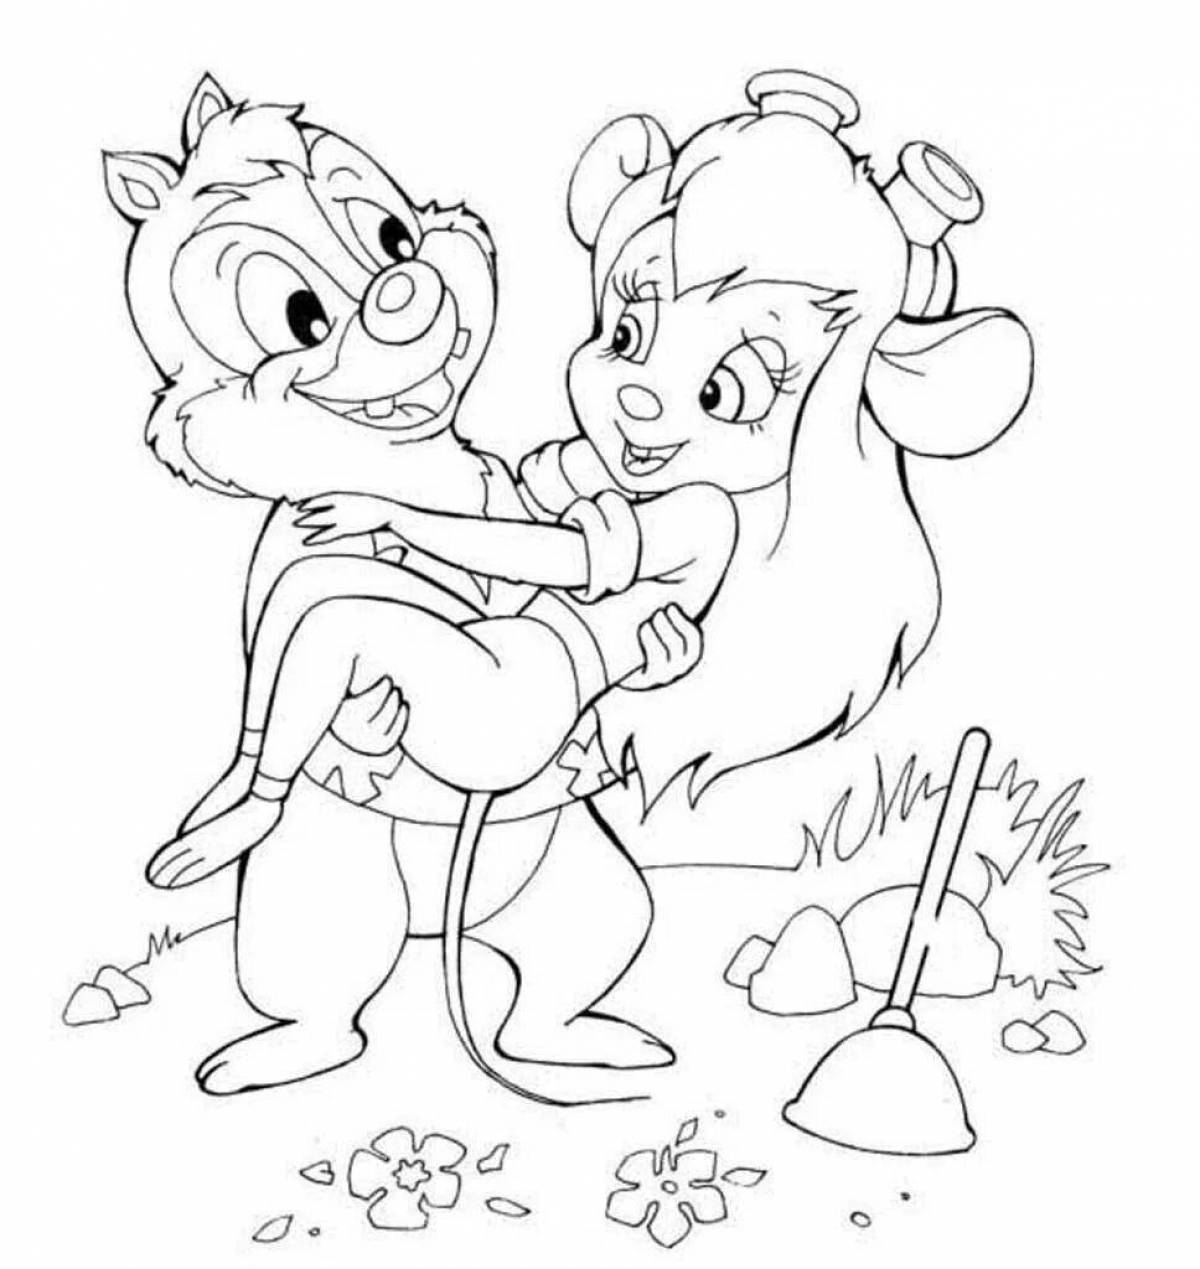 Cute cartoon coloring book for 6-7 year old girls